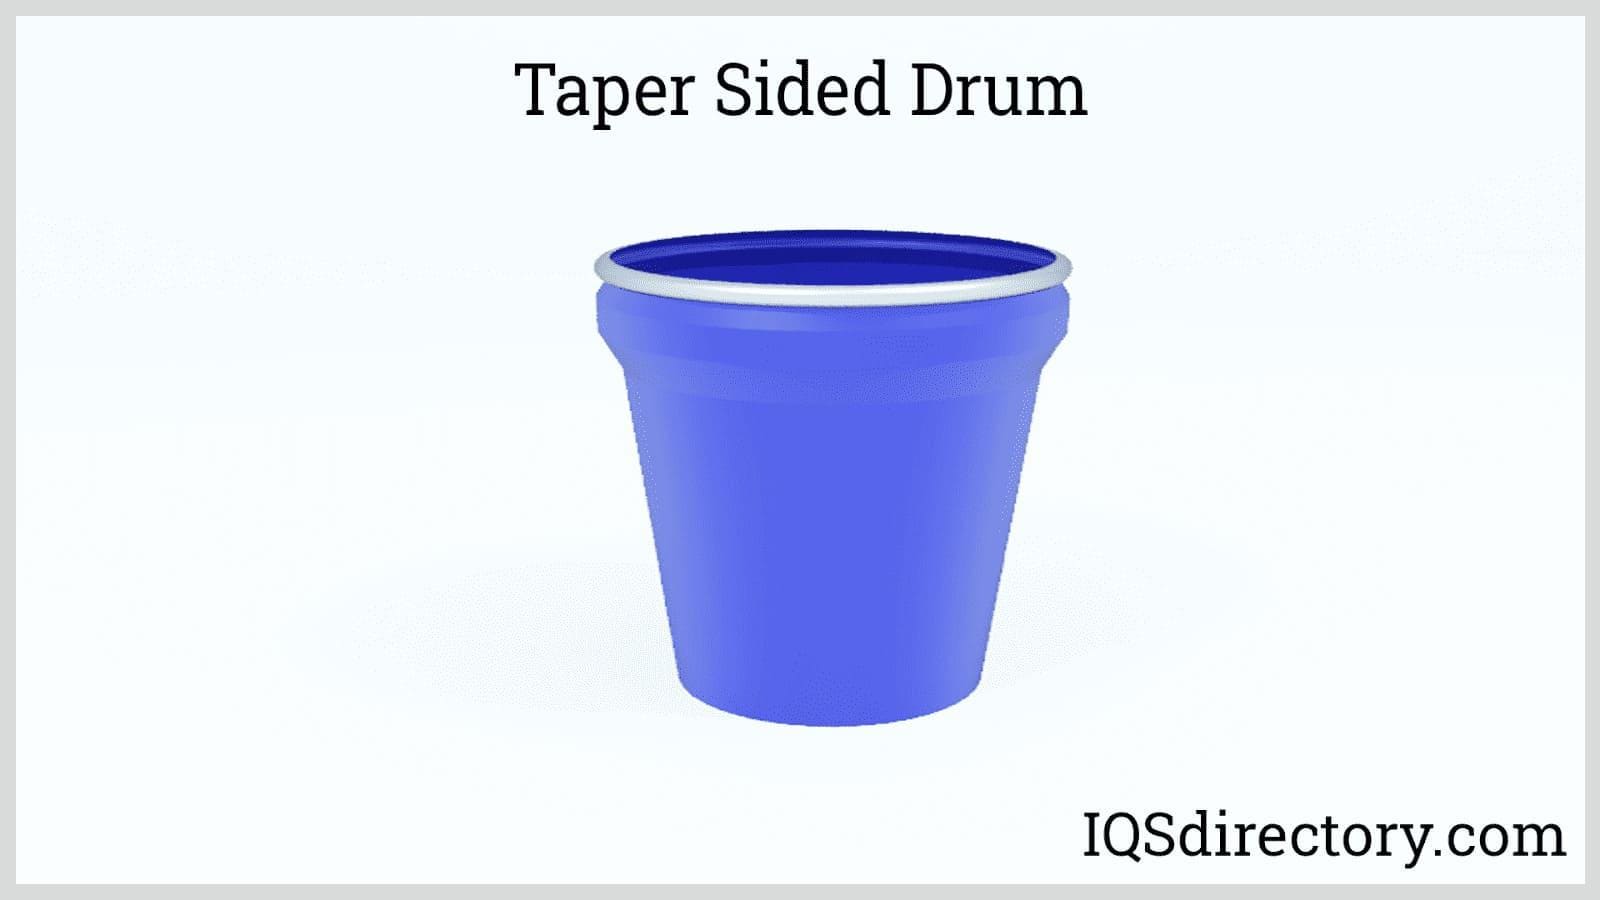 Taper Sided Drum